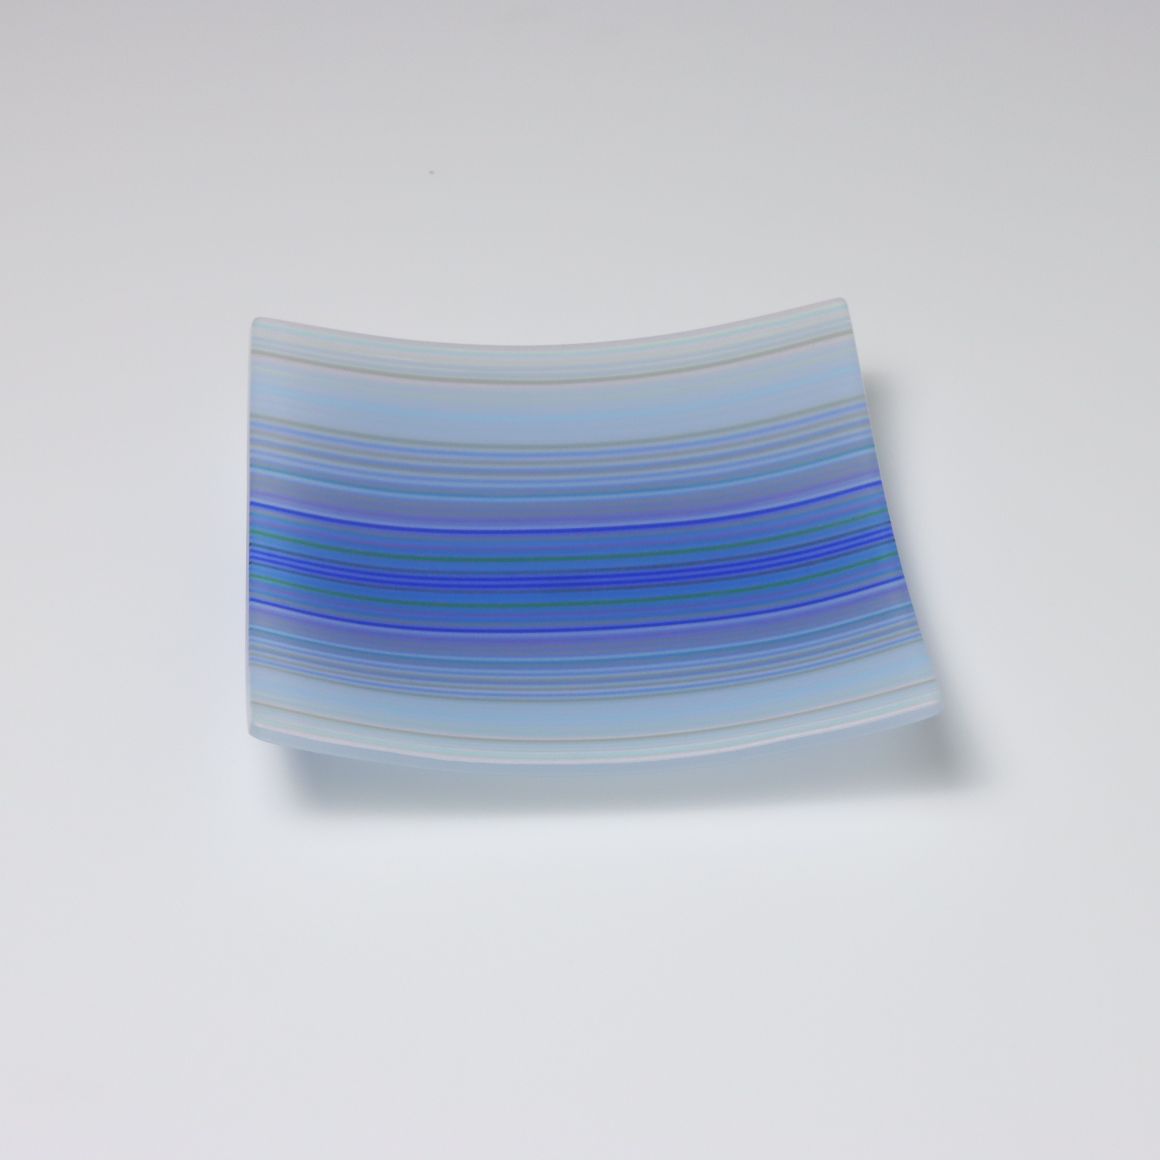 R4270 | Square Shaped ColourWave Glass Plate | Pale and Dark Blues